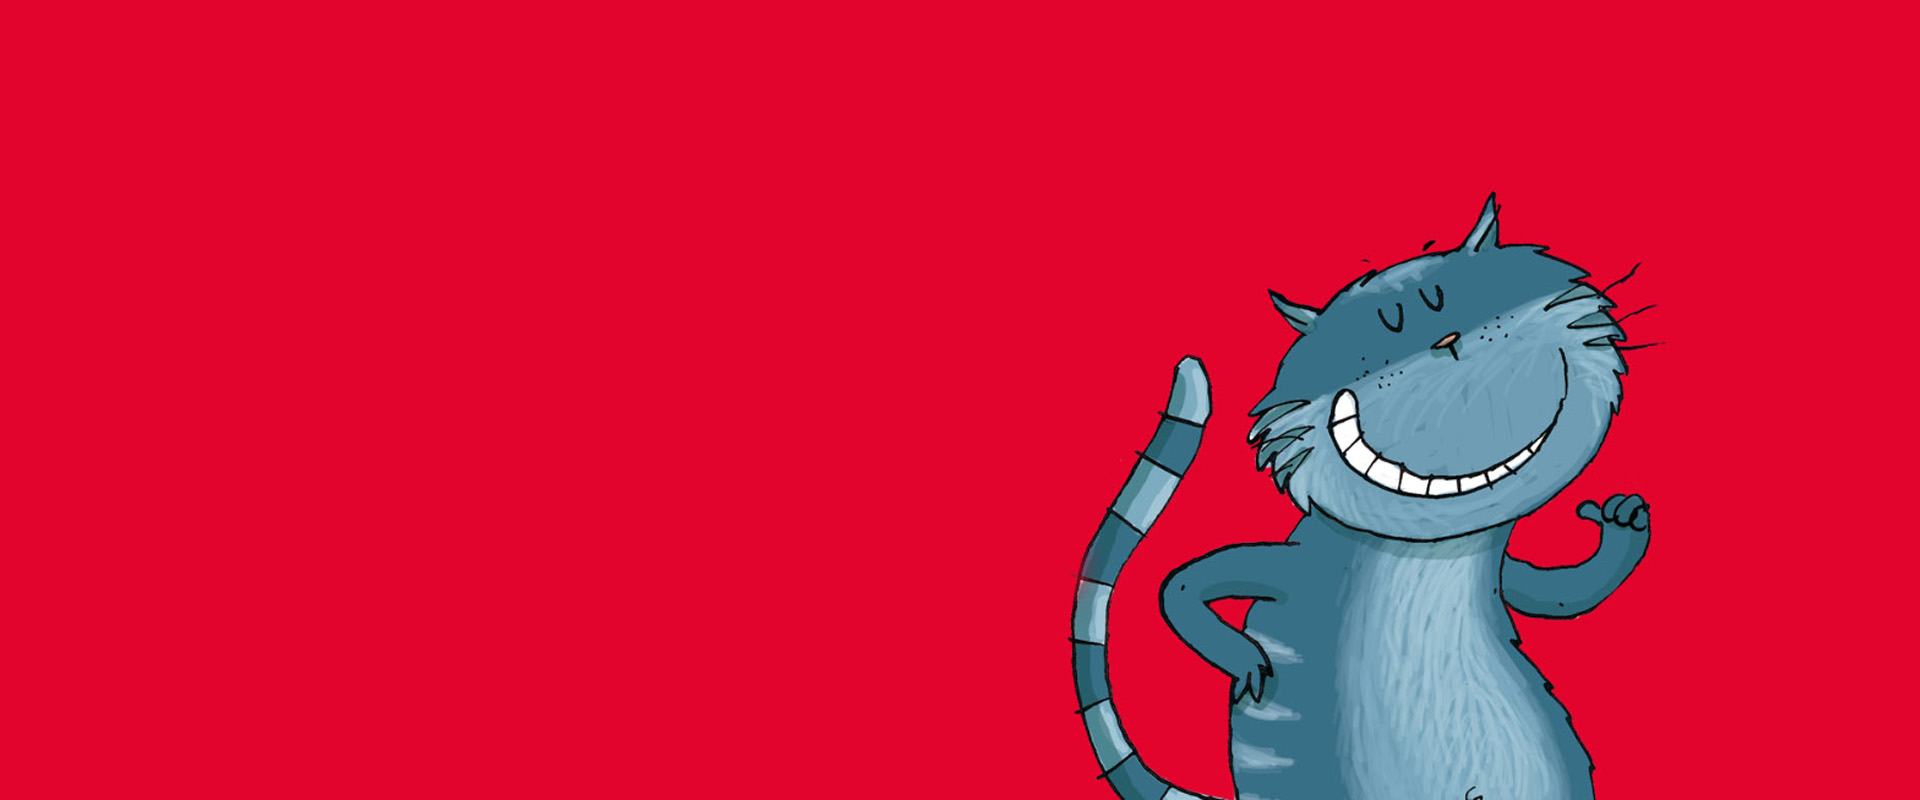 image of an illustrated cat on a red banner